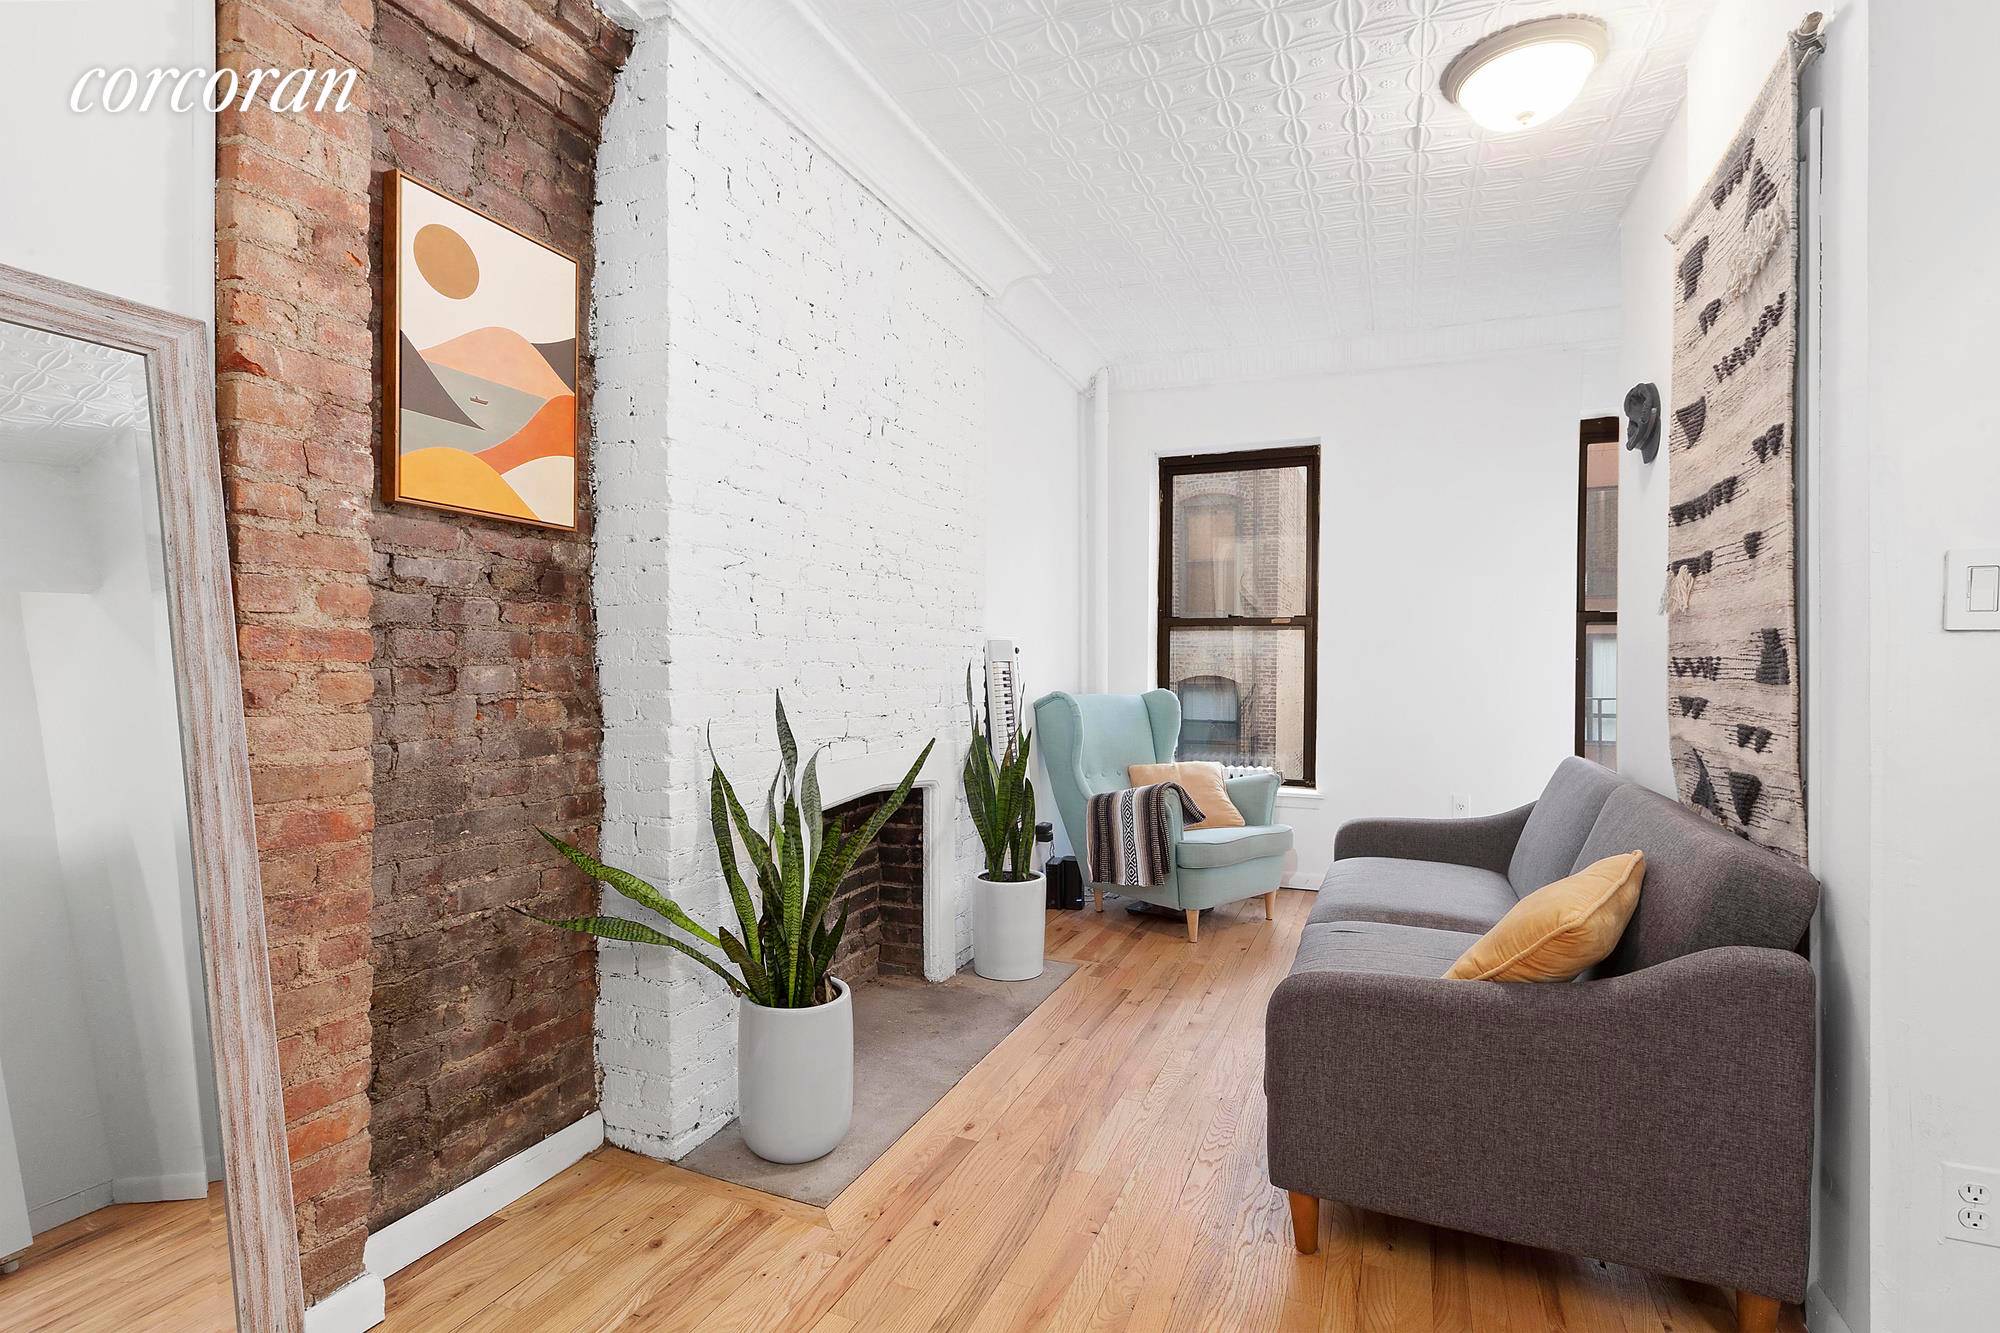 Apartment 12 at 148 Sullivan is a quiet, renovated amp ; rent stabilized true one bedroom with a spacious layout, natural light and classic charm.